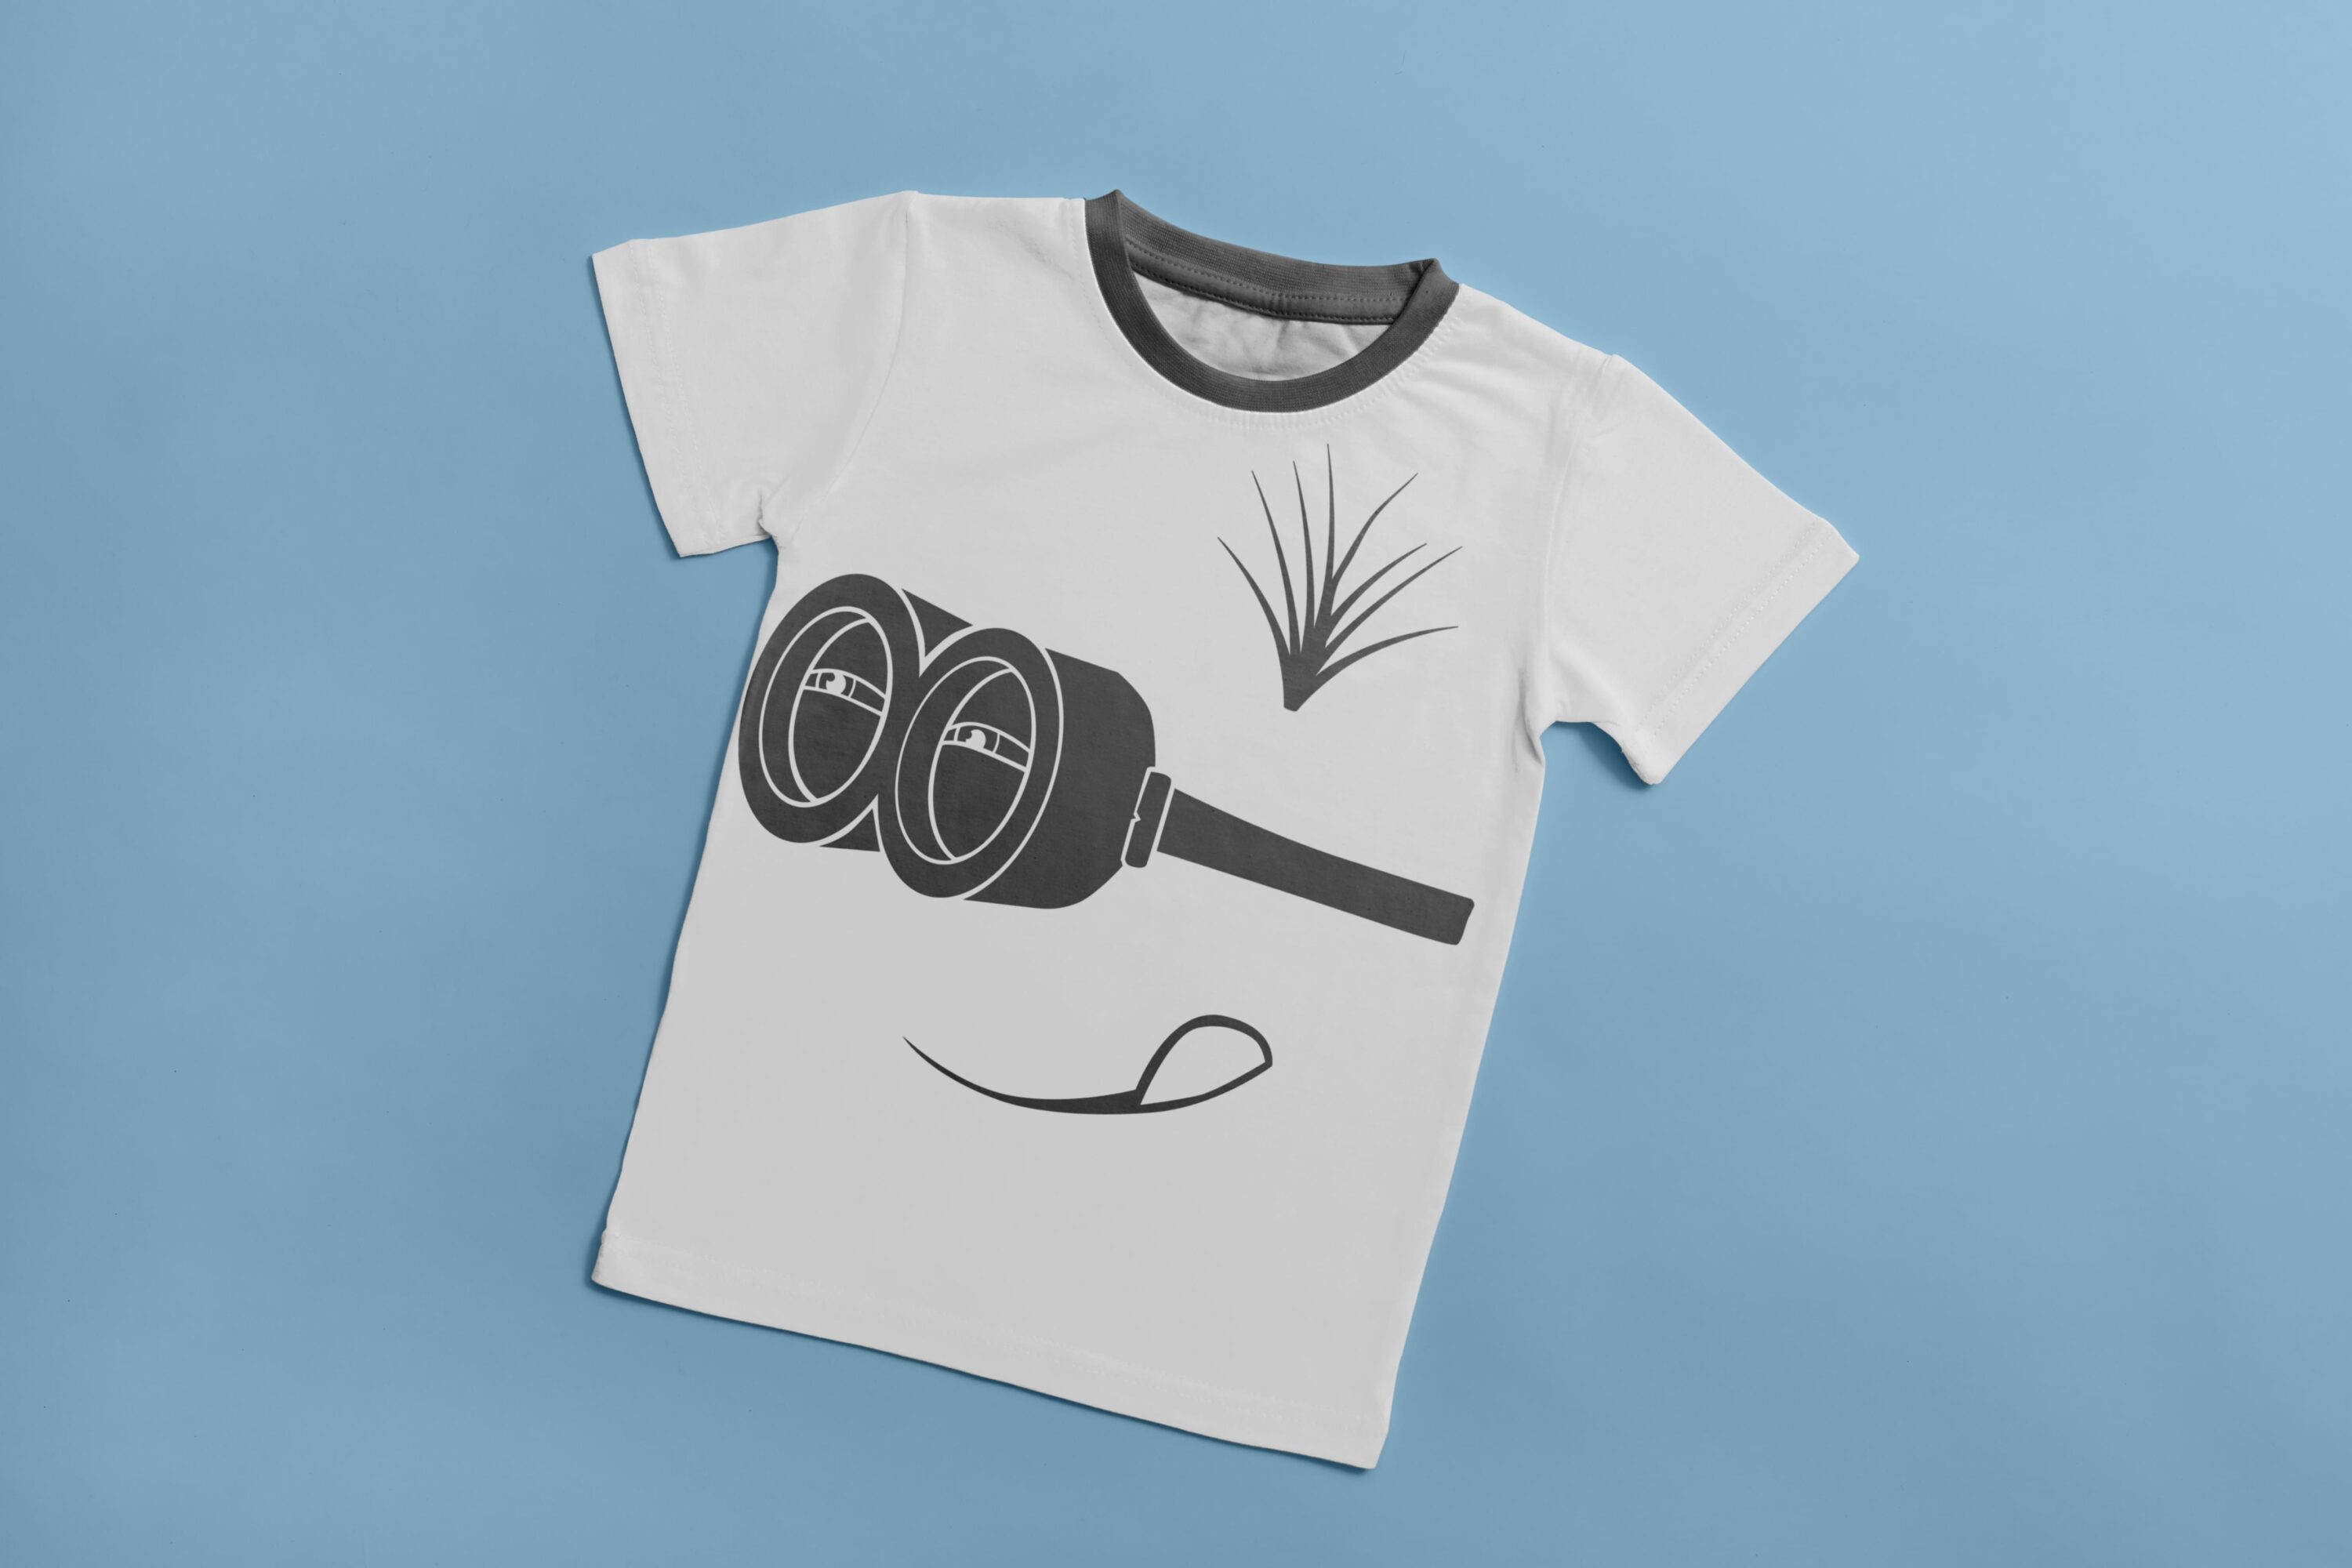 A white T-shirt with a gray collar and a gray silhouette of a interested minion.